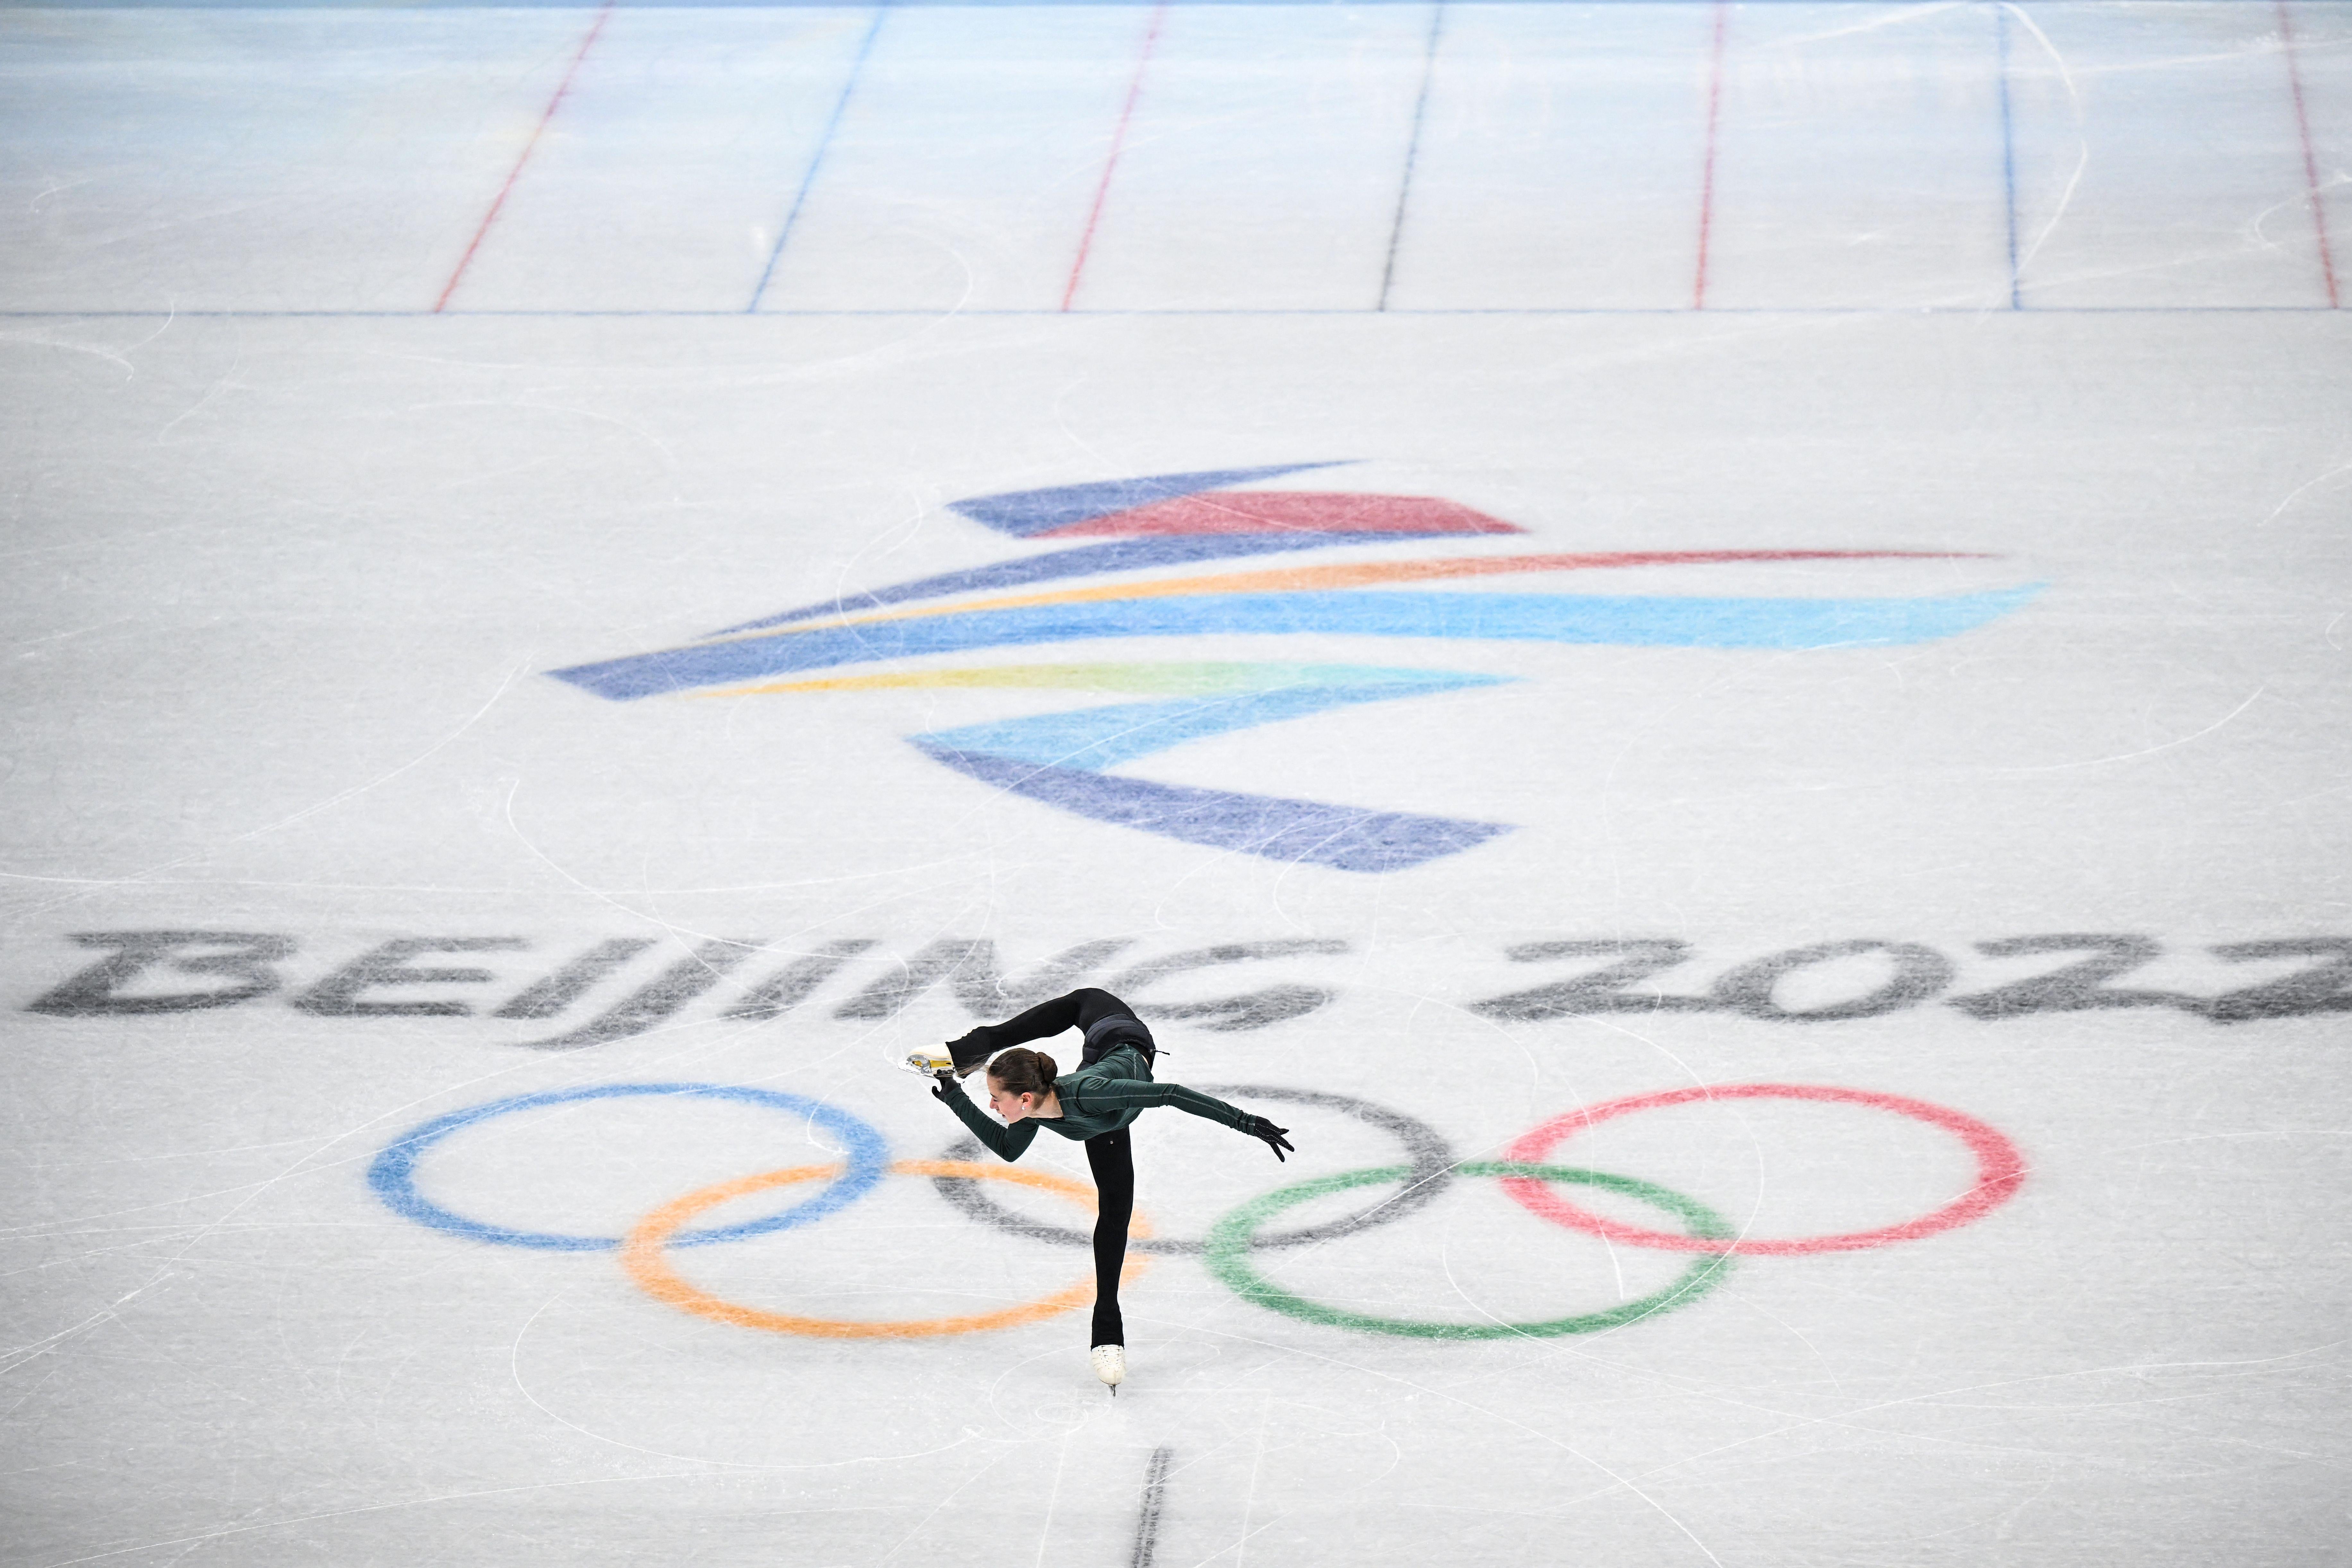 A figure skater contorting herself with her leg above her head, with the Beijing 2022 and Olympic rings logos on the ice.